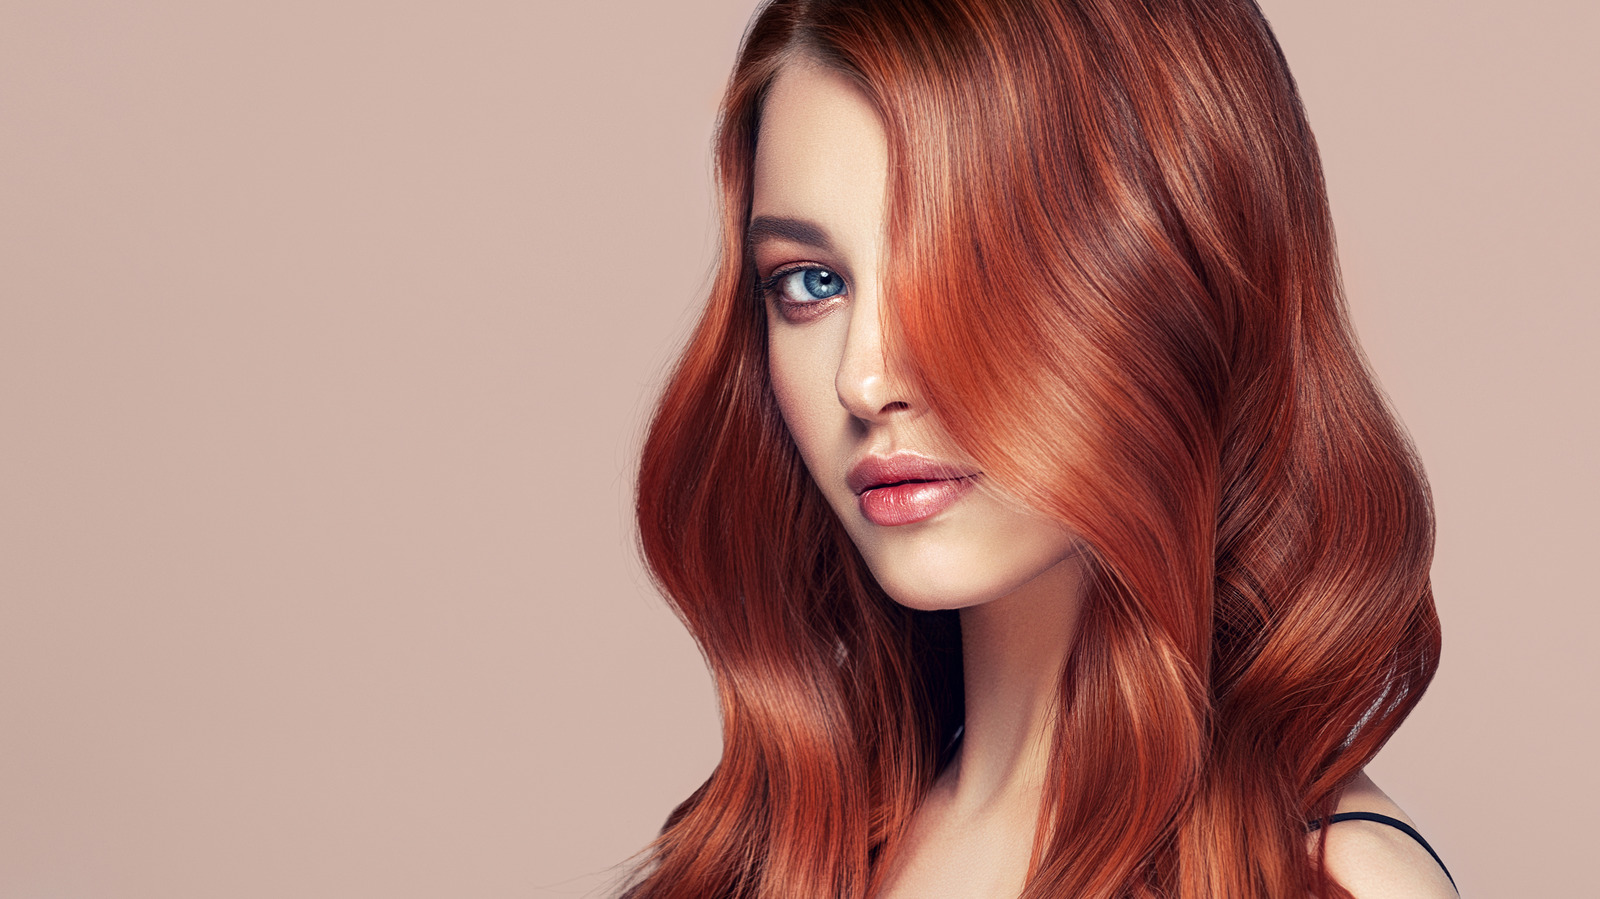 Here's The Right Way To Take Care Of Your Red Hair